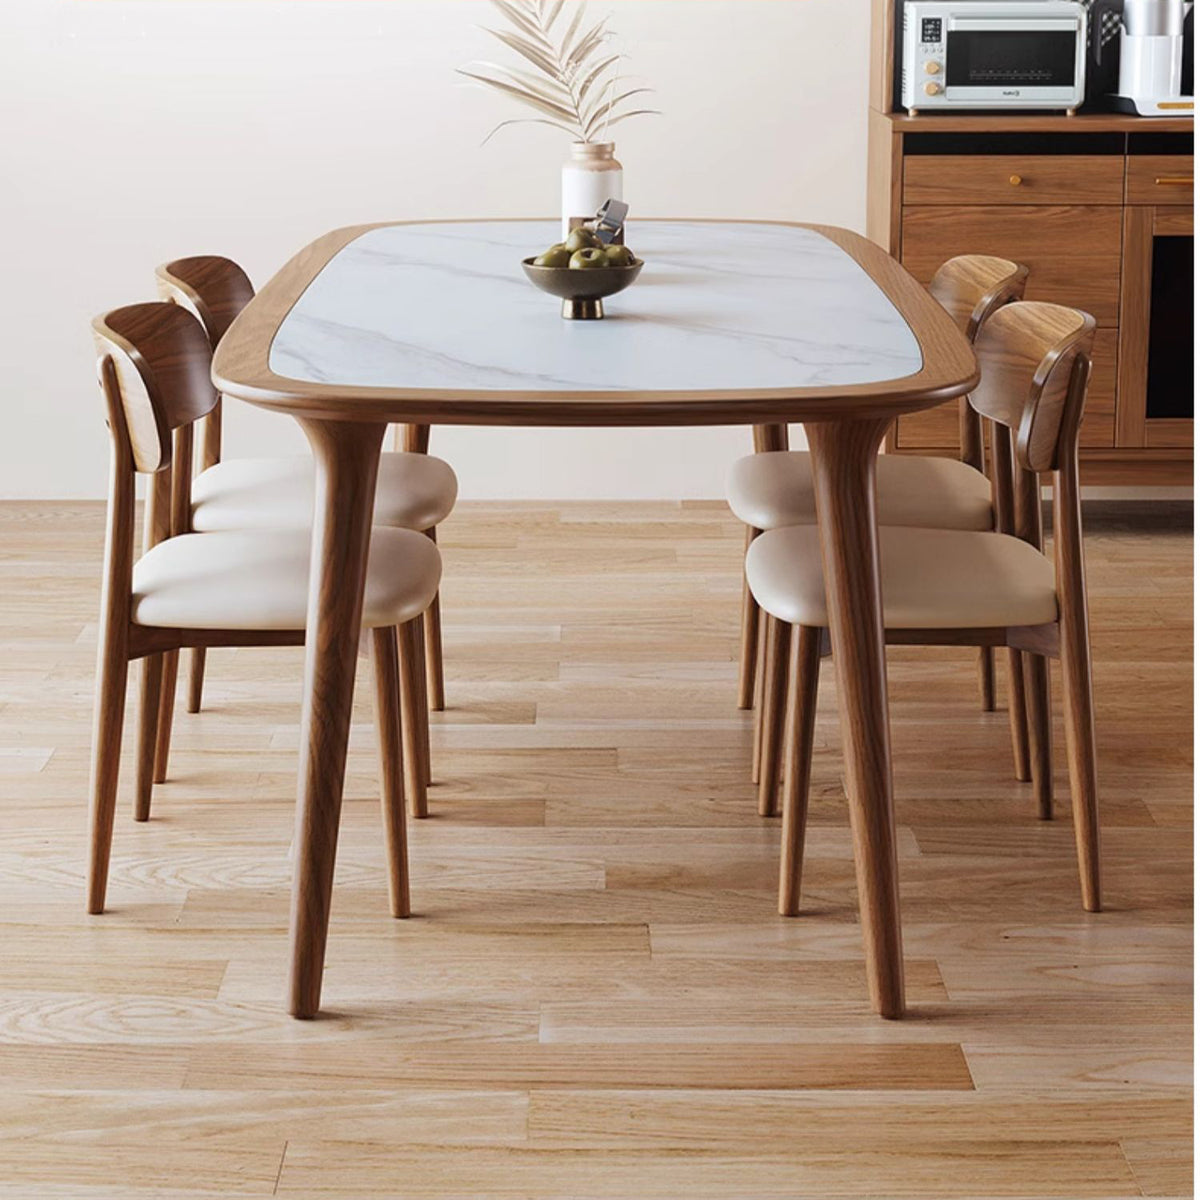 Sleek Matte White Sintered Stone & Ash Wood Dining Table – Modern Elegance for Your Home fmbs-002